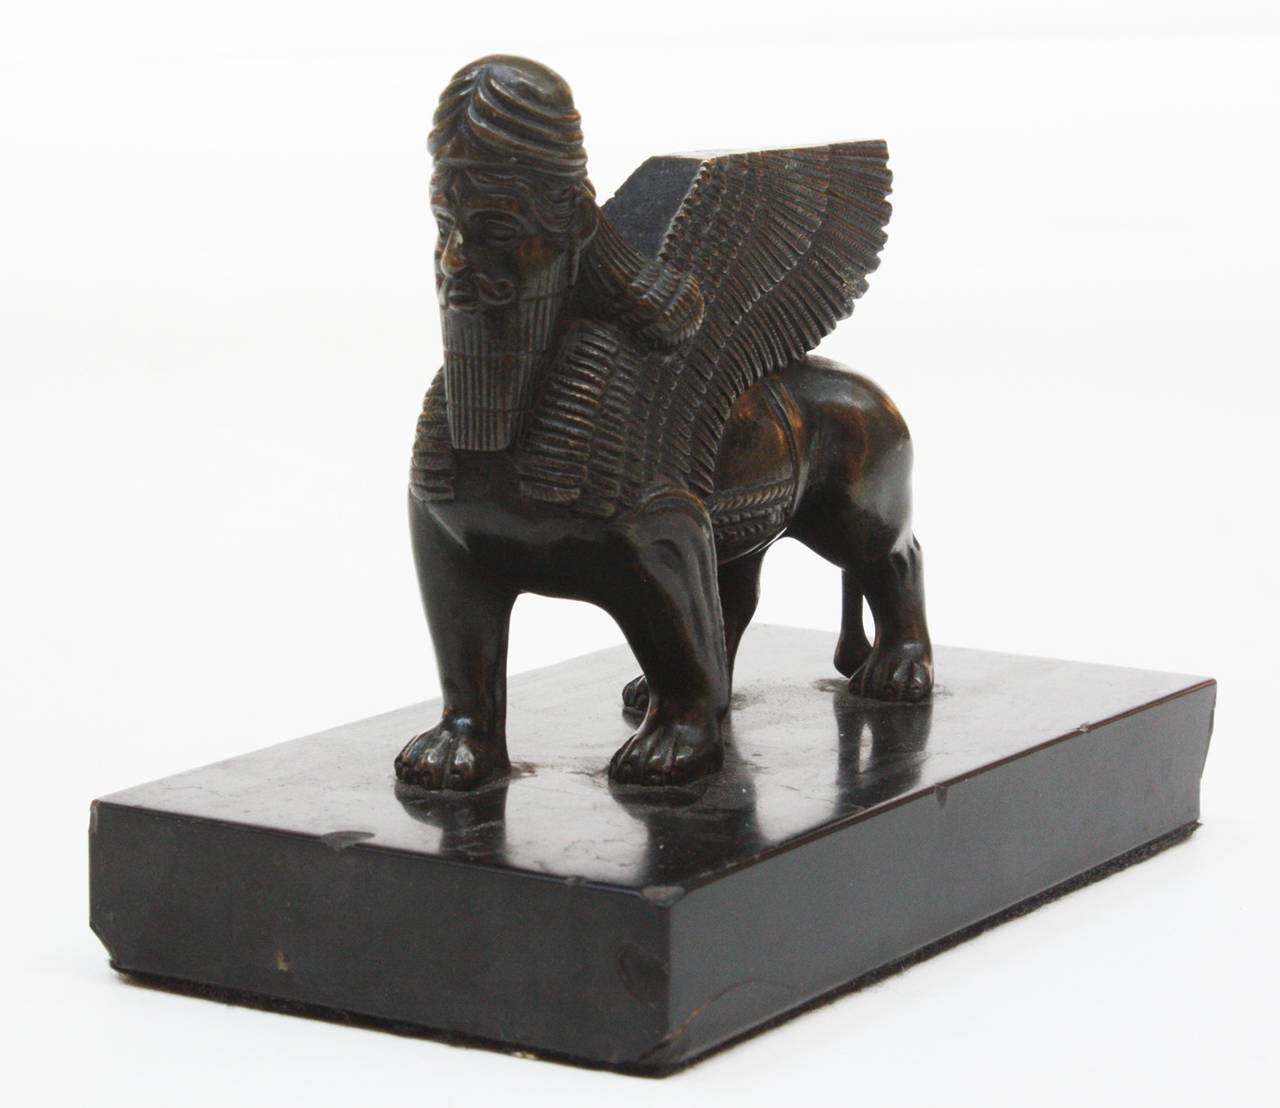 a bronze lamassu, an Assyrian protective deity, often depicted with a bull or lion's body, eagle's wings, and a human's head, on a black marble base

the Assyrians typically placed them at the entrance to cities and palaces